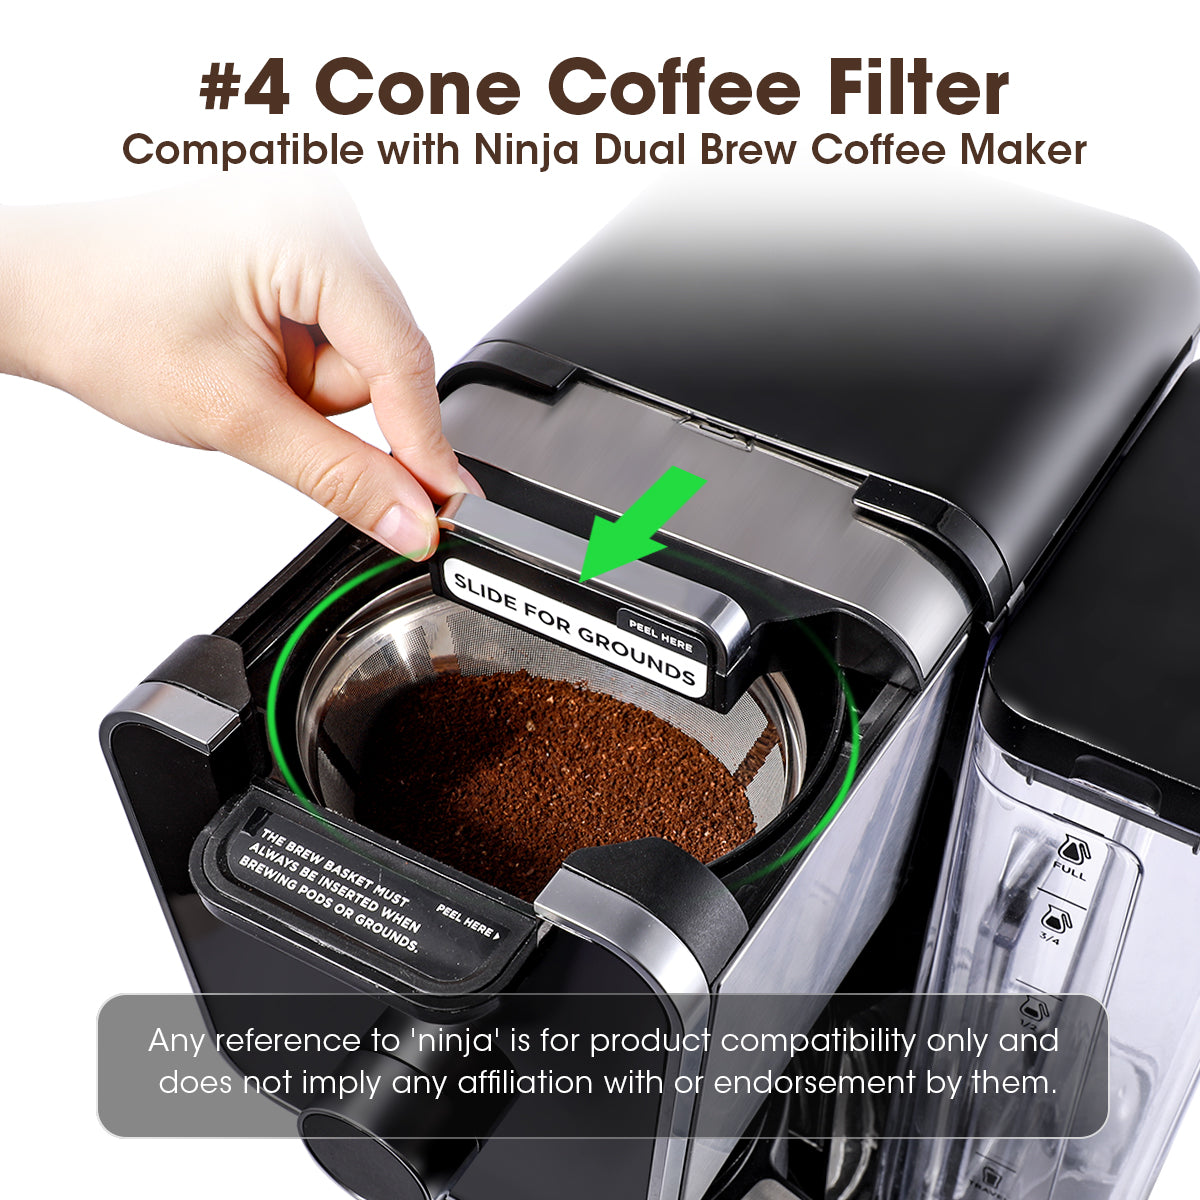 4 cone coffee filter compatible with Ninja Dual Brew Coffee Maker